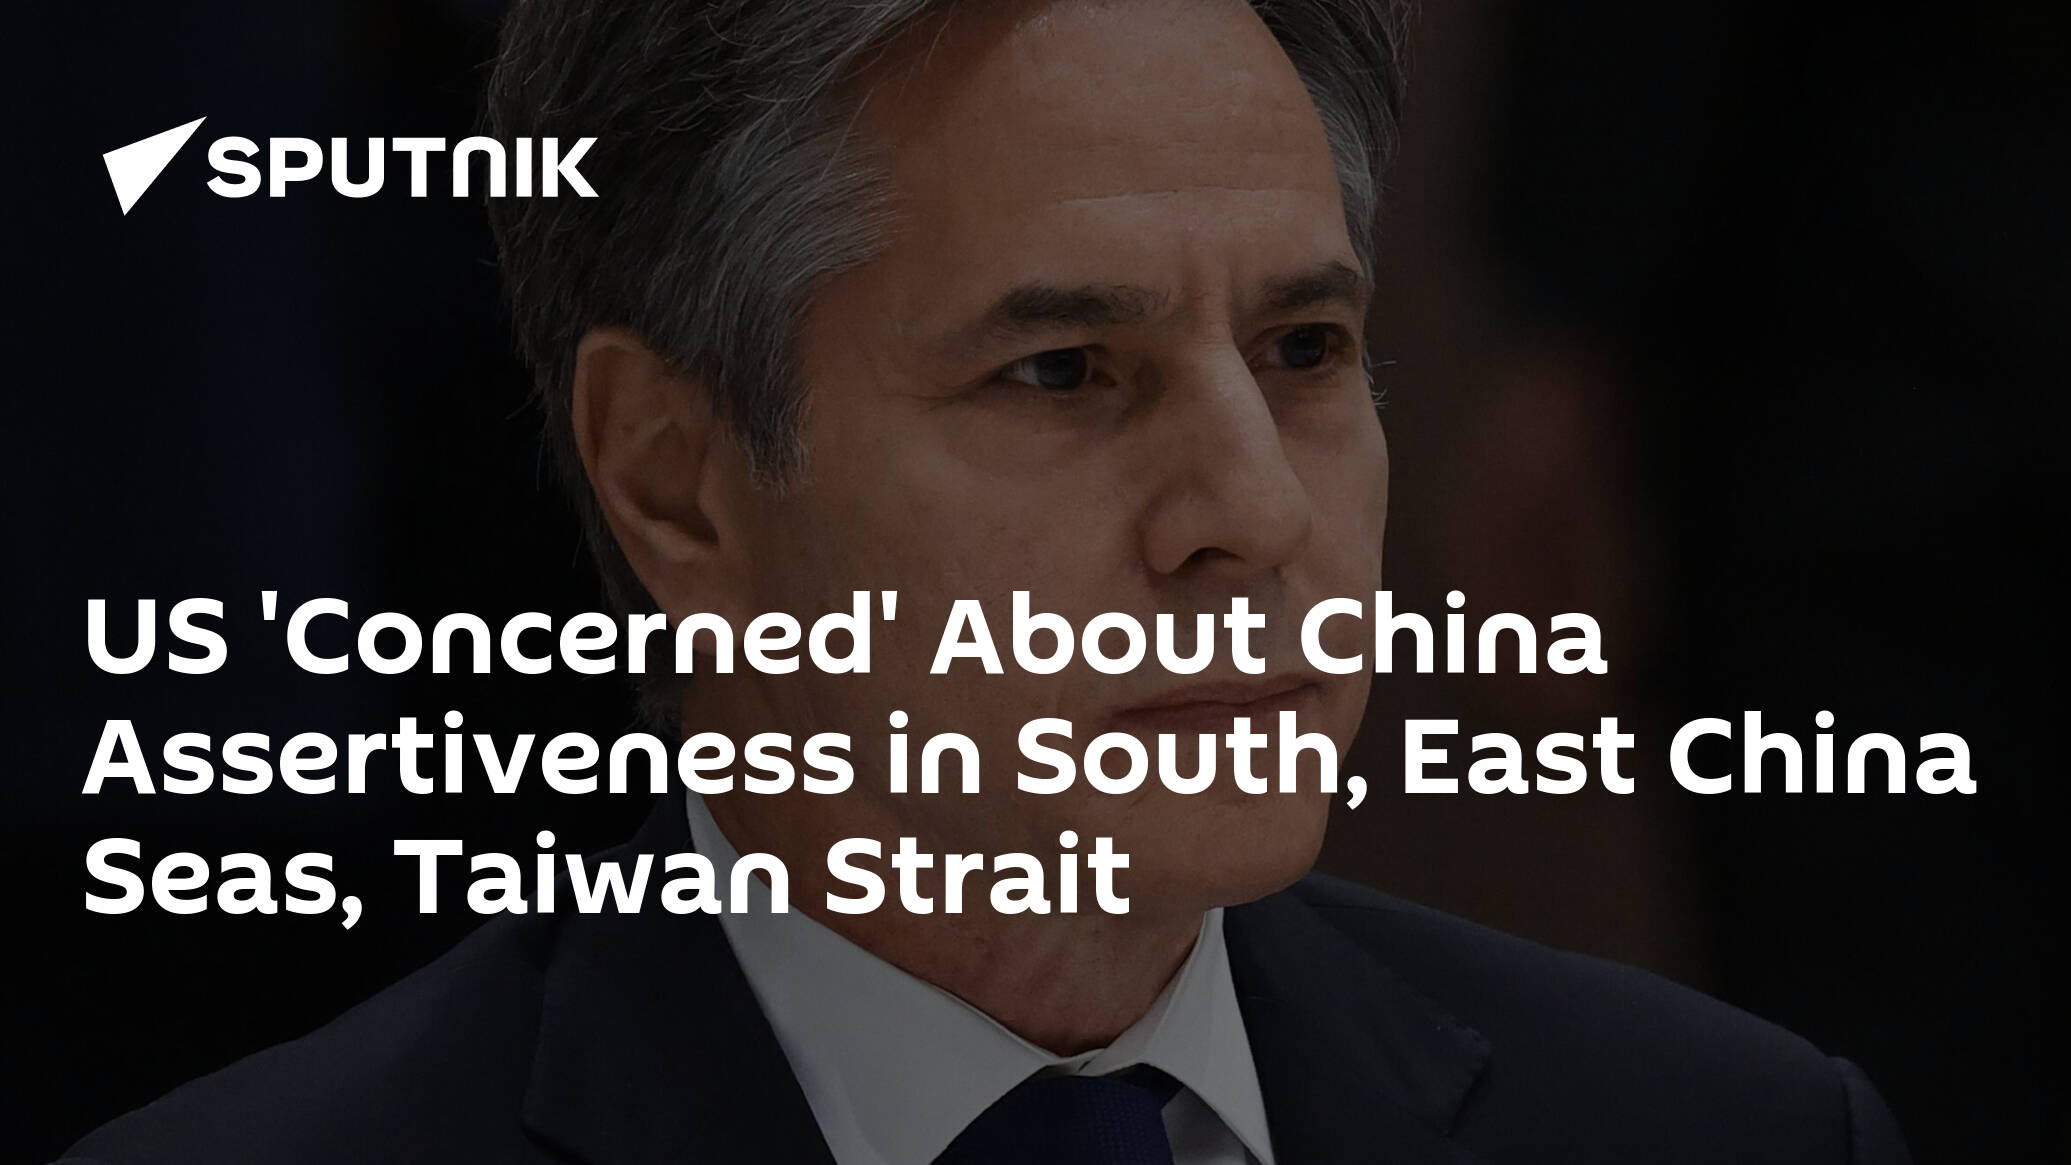 US Concerned About China Assertiveness in South, East China Seas, Taiwan Strait